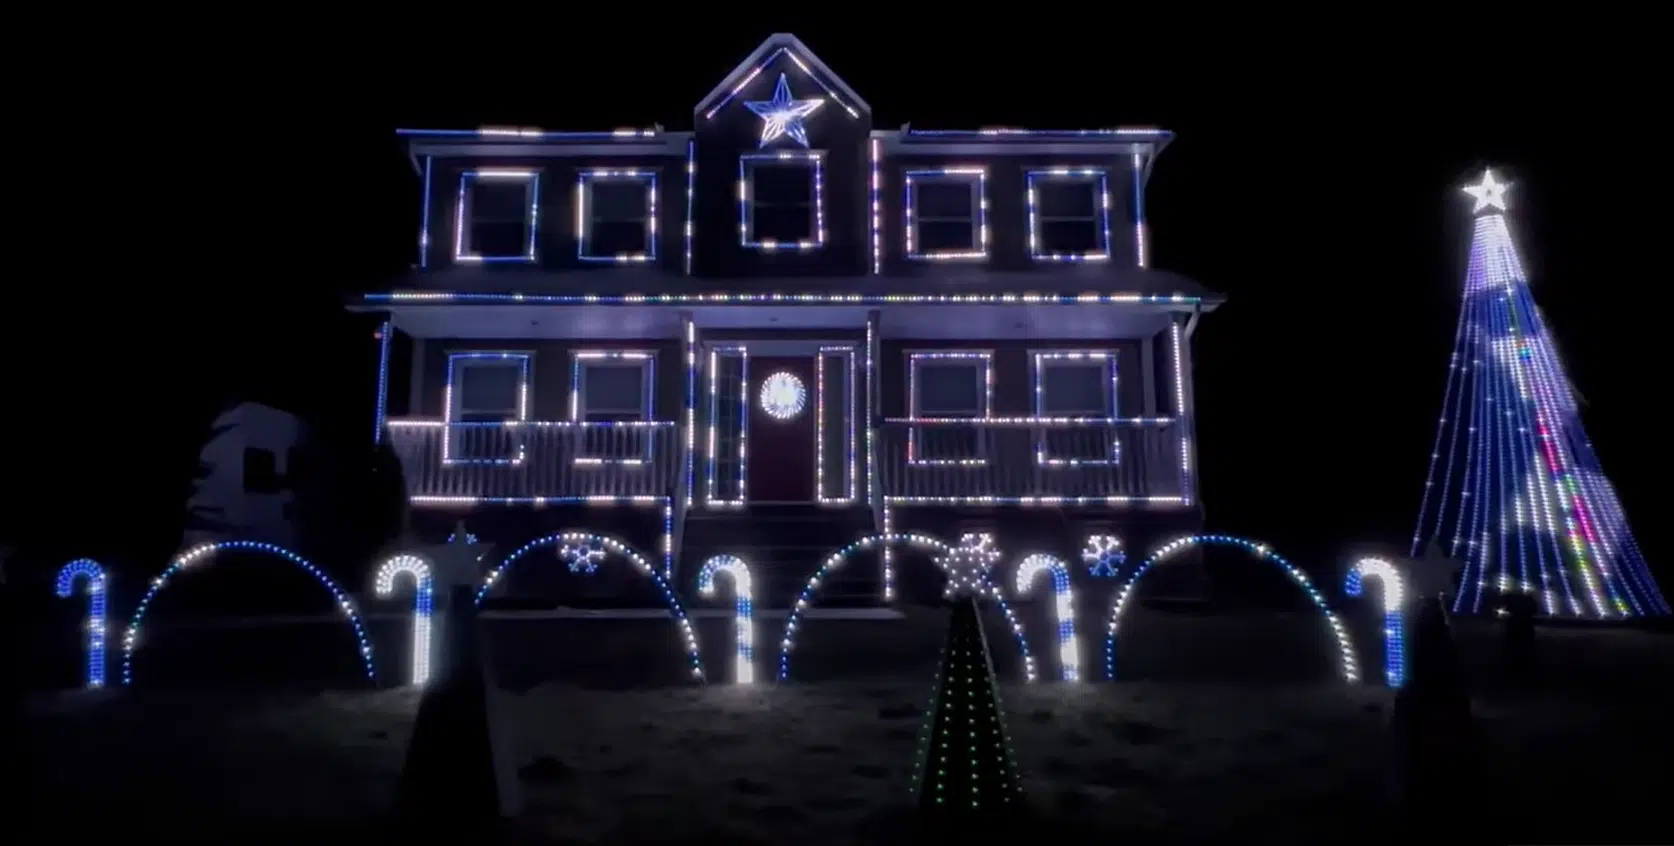 THEE Best-Decorated Home in Nova Scotia!